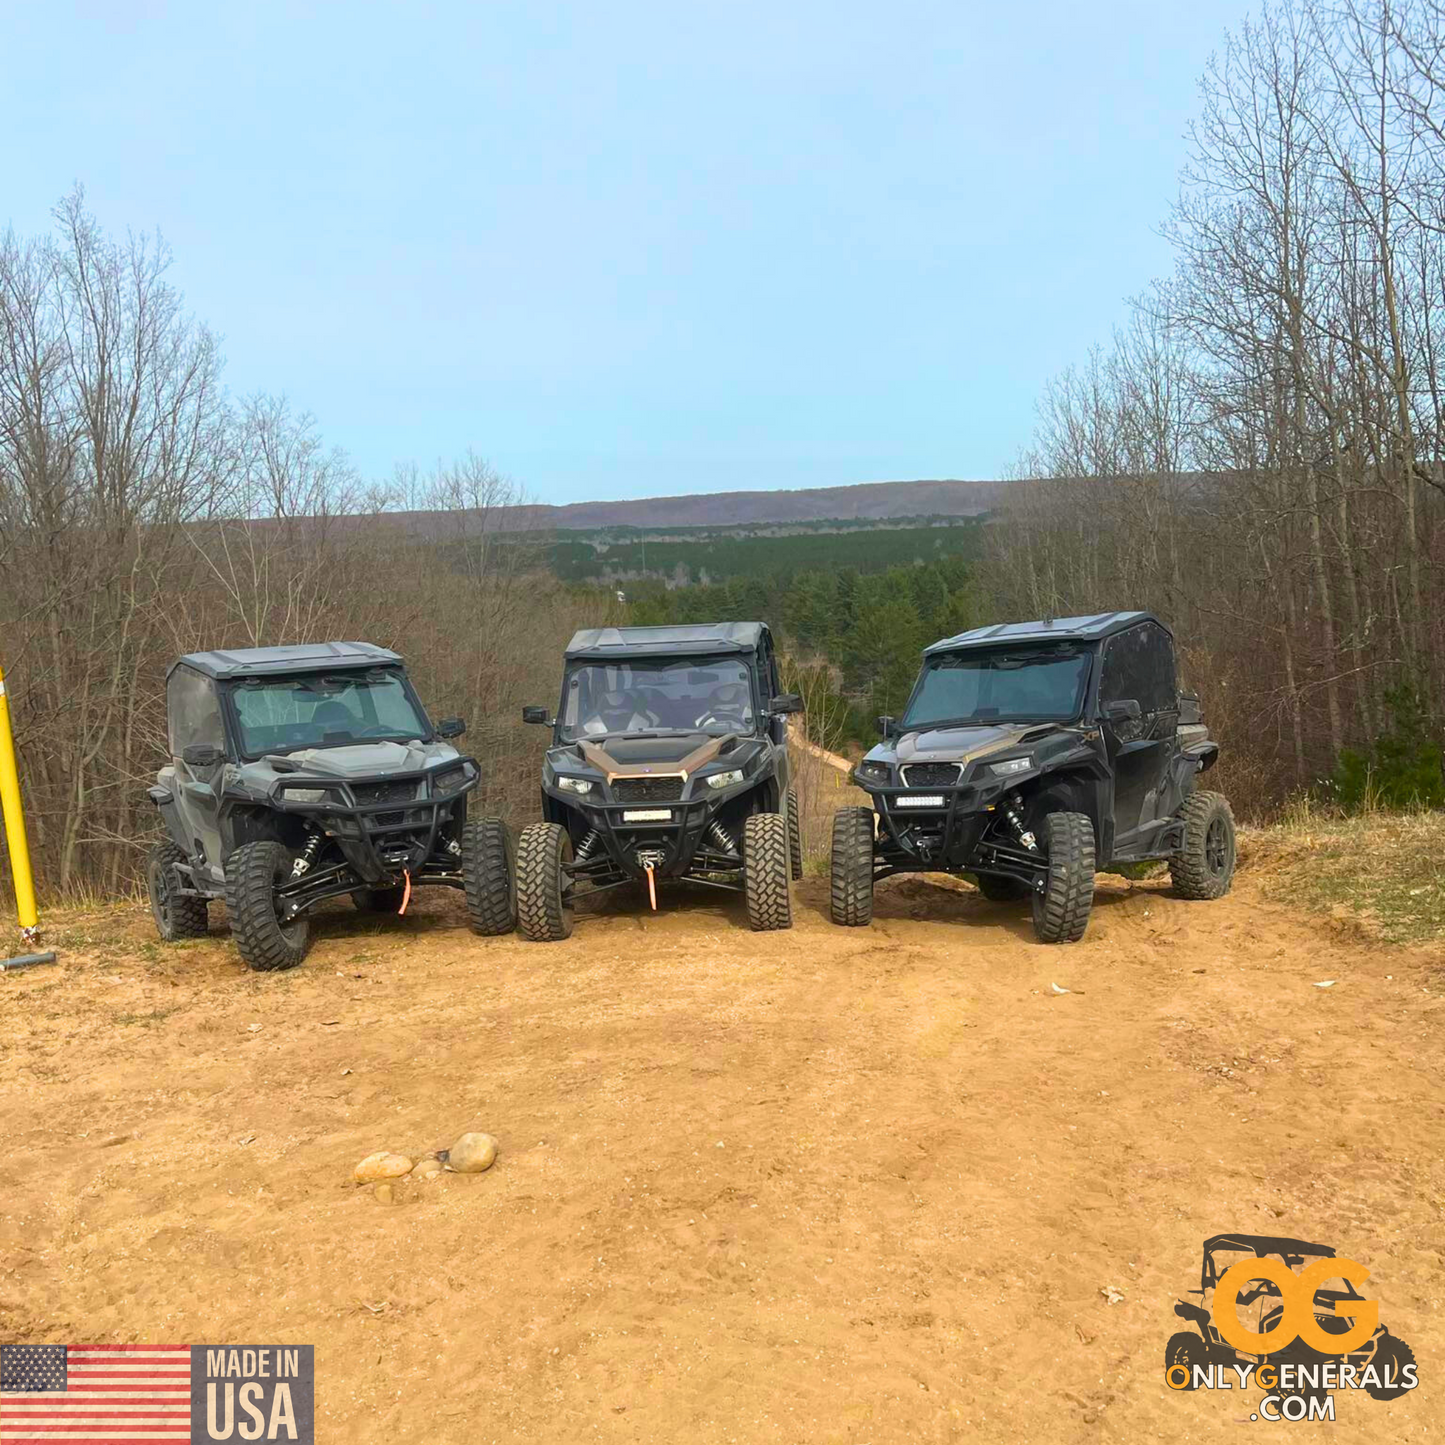 Customer submitted photo with several Polaris Generals showing off their SideskinsLITE hard upper doors from OnlyGenerals